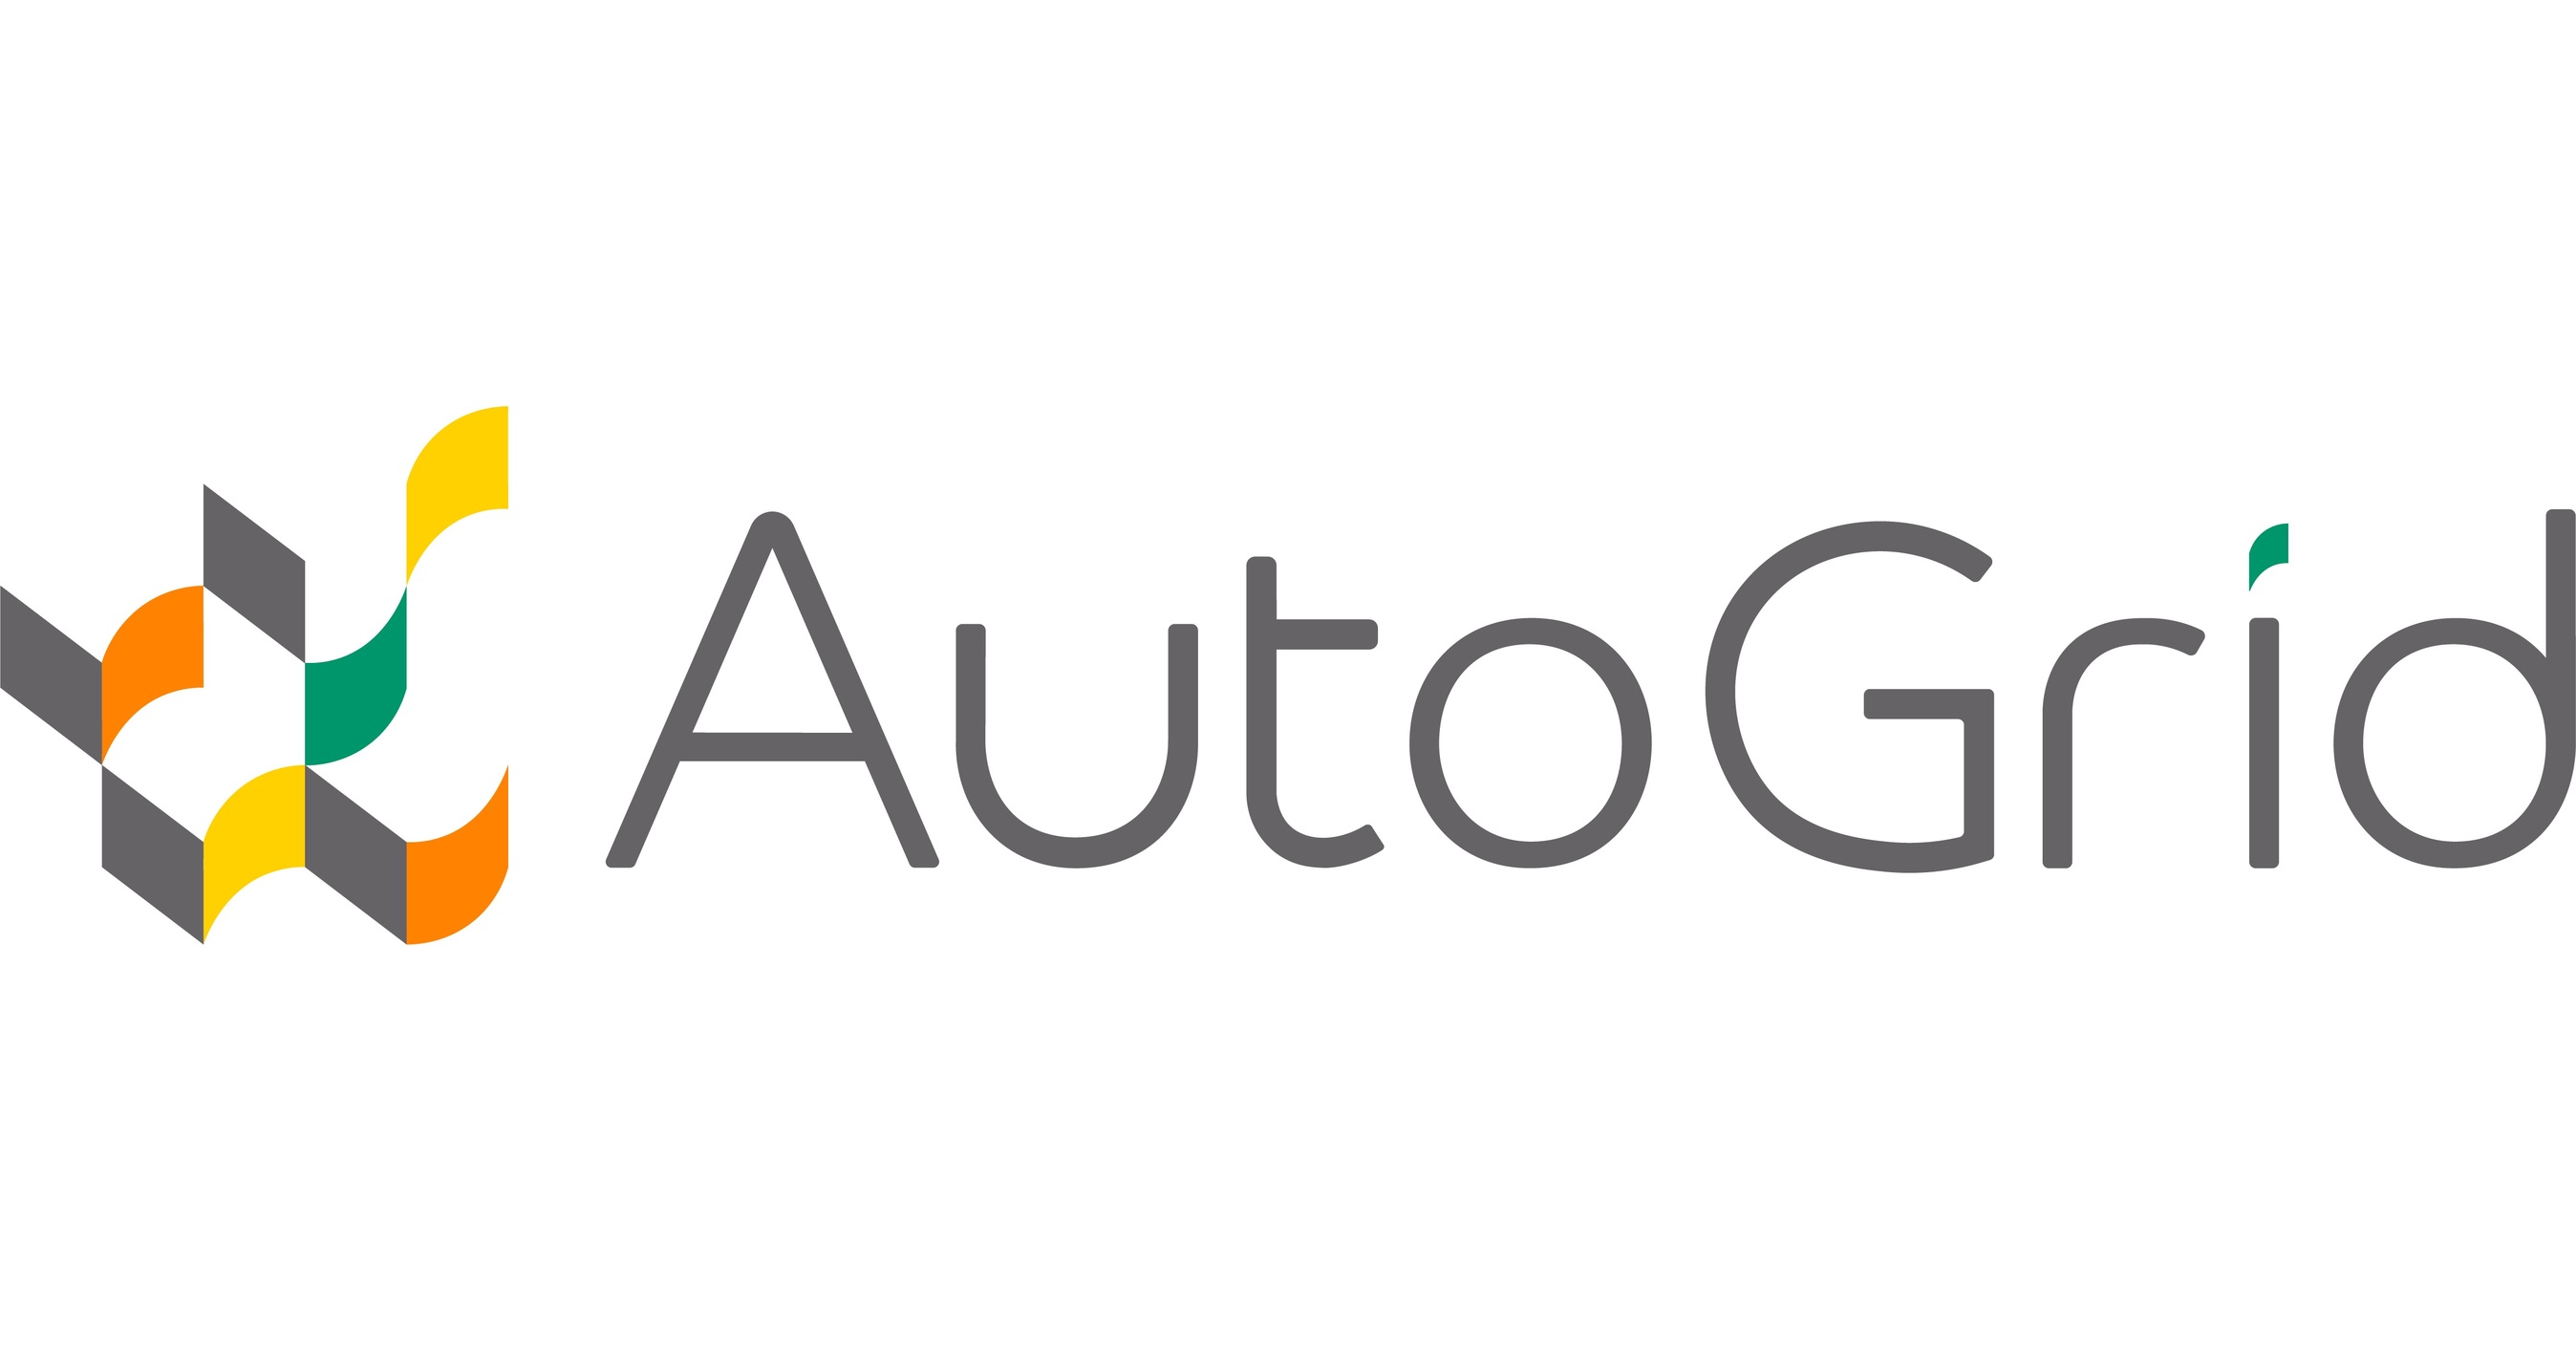 AutoGrid Partners with Mysa to Launch Utility-Scale Virtual Power Plants Using Smart Thermostat Technology for Grid Modernization